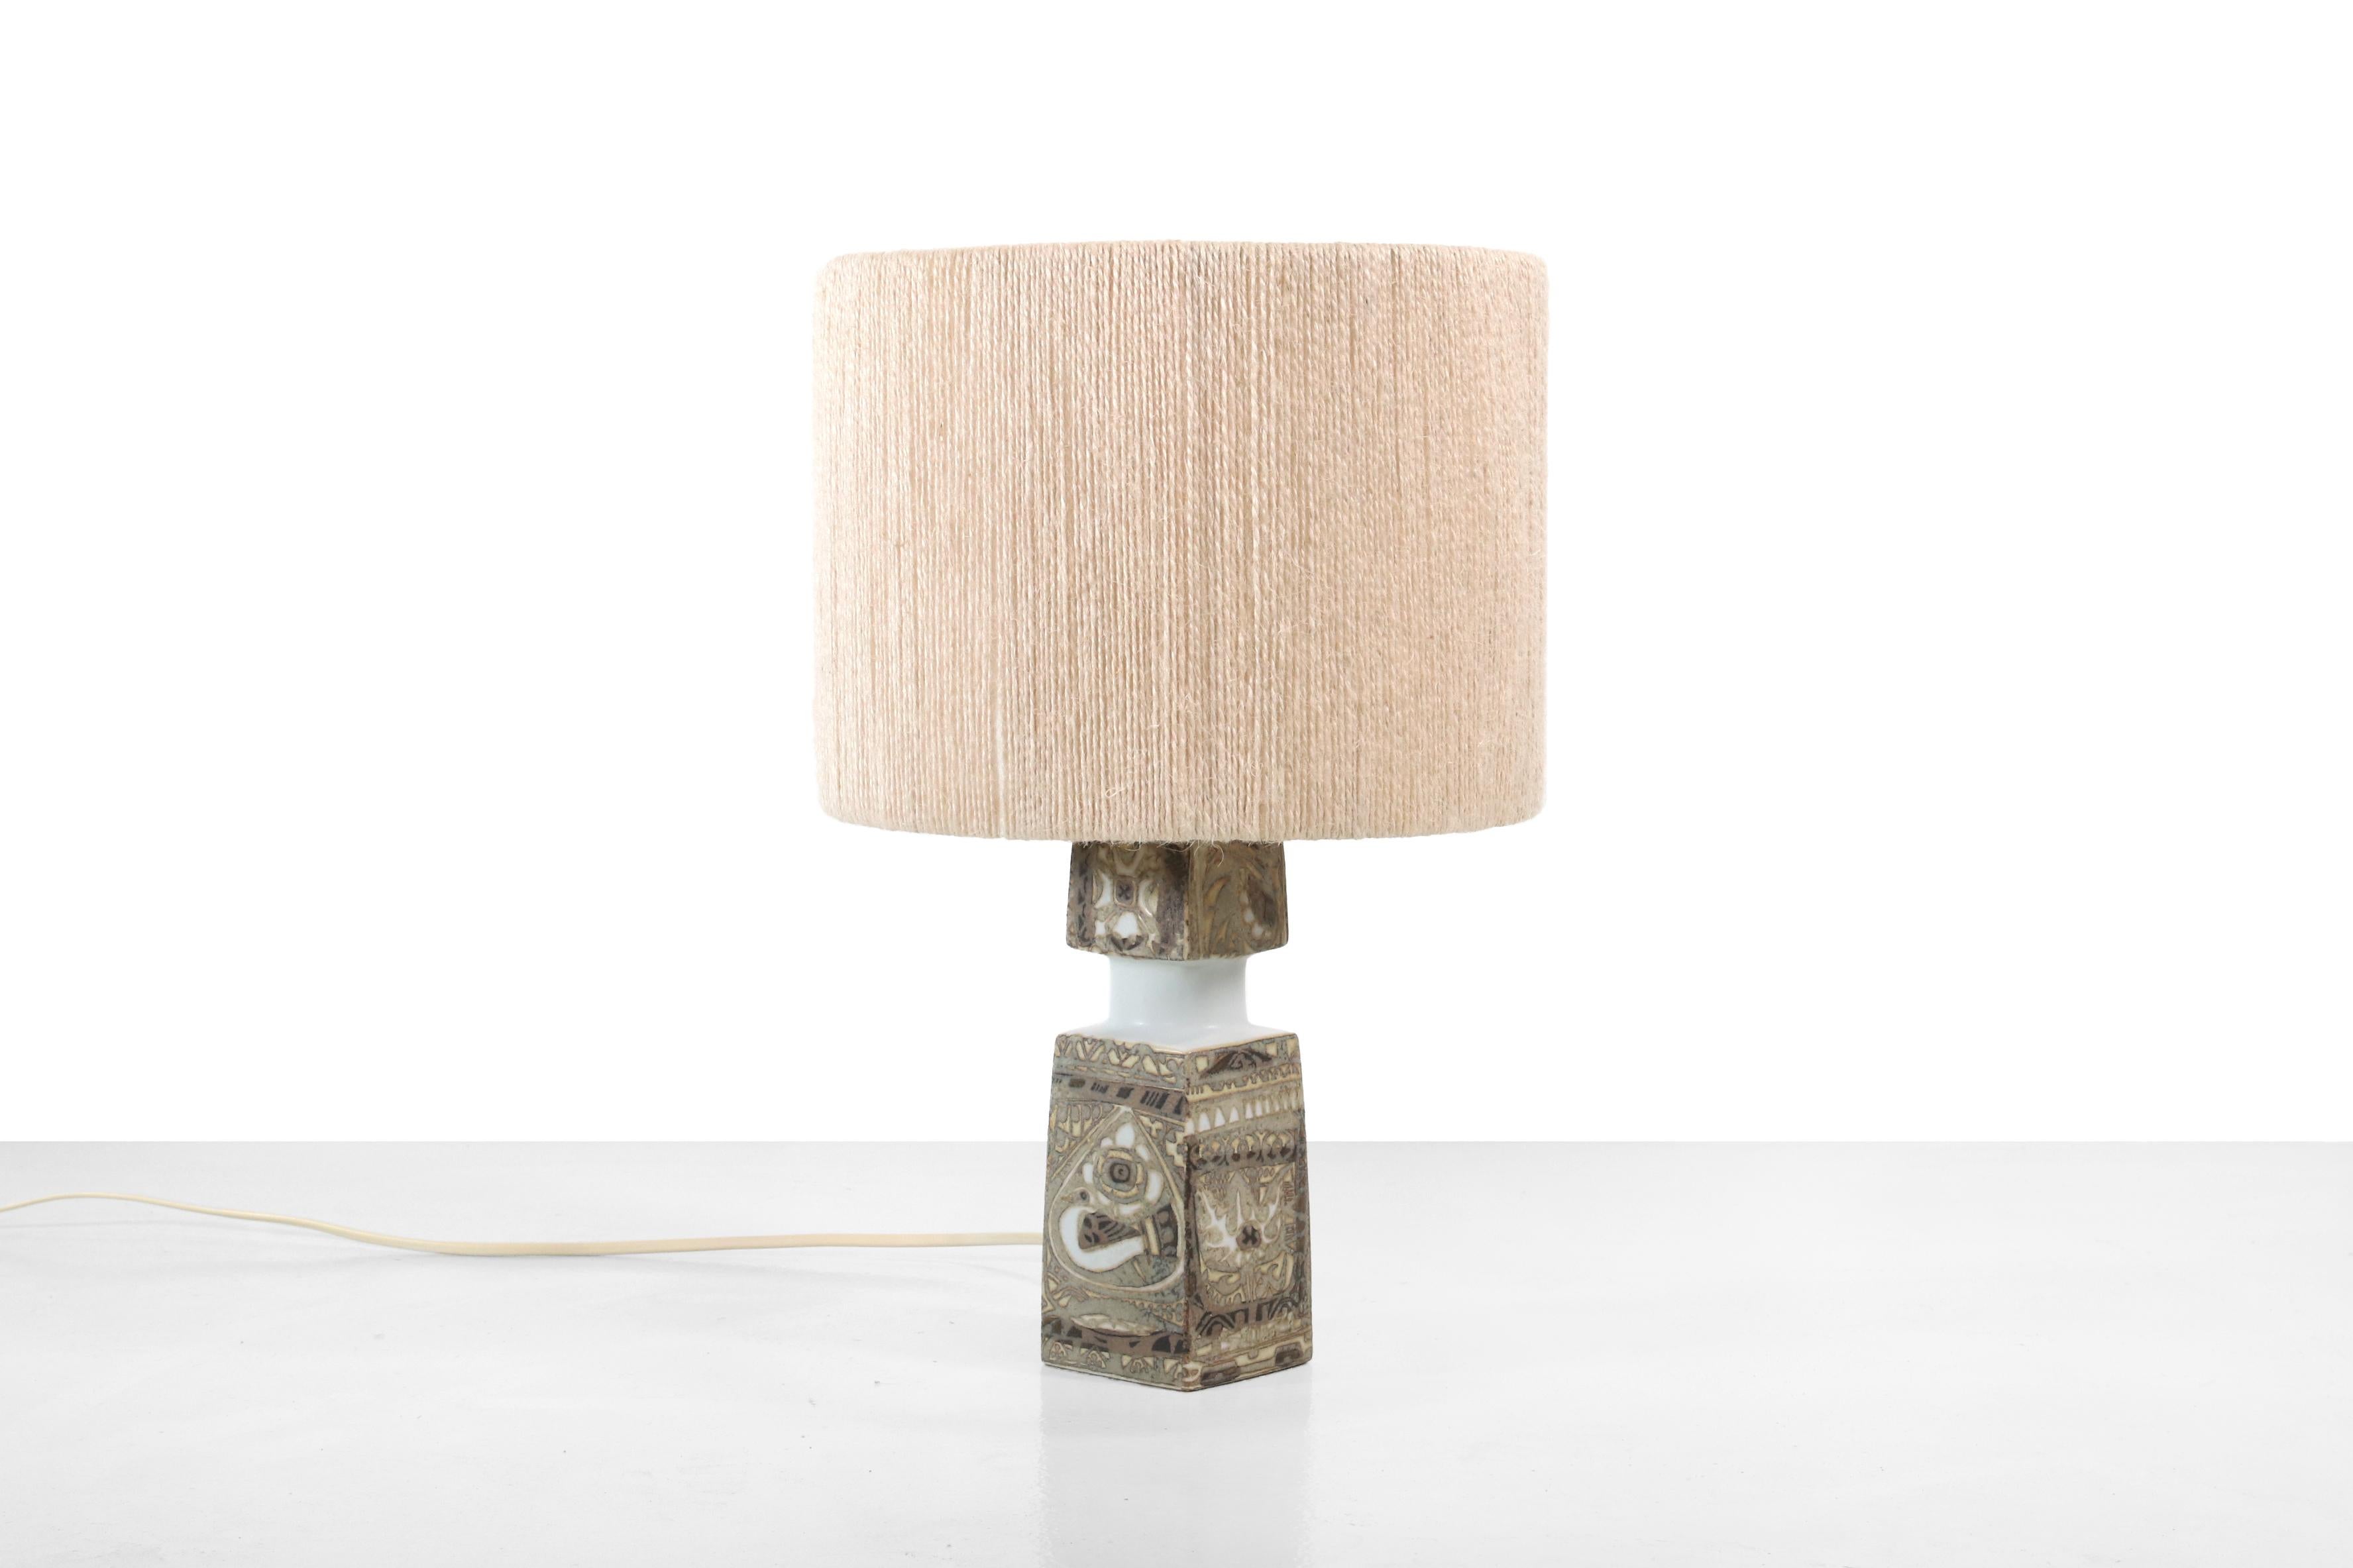 Beautiful ceramic Royal Copenhagen table lamp by Nils Thorsson for Fog & Mørup. This lamp has the model name BACA III and is a wonderful collaboration between a designer, ceramic producer and a lamp factory. A functional art object. The shade is